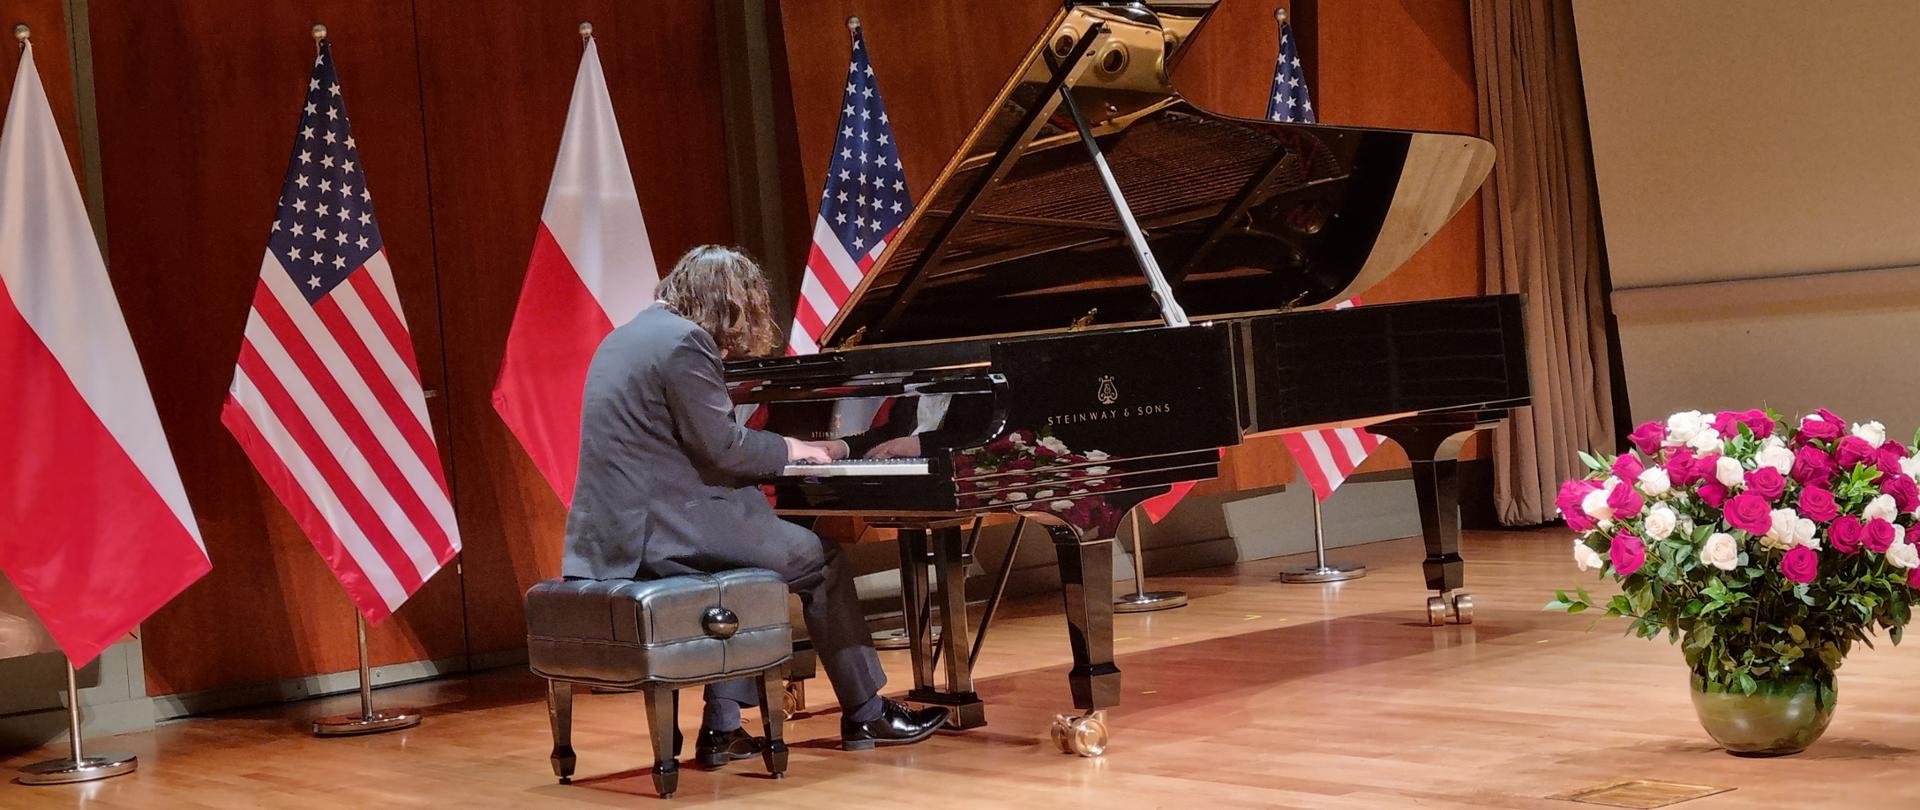 Piano recital by Jakub Kuszlik on the occasion of Poland's National Independence Day. The pianist performs works by Polish composers on a black king on stage at the Colburn School in Los Angeles. In the background are the flags of Poland and the United States. A red and white bouquet of roses stands in front of the piano. 